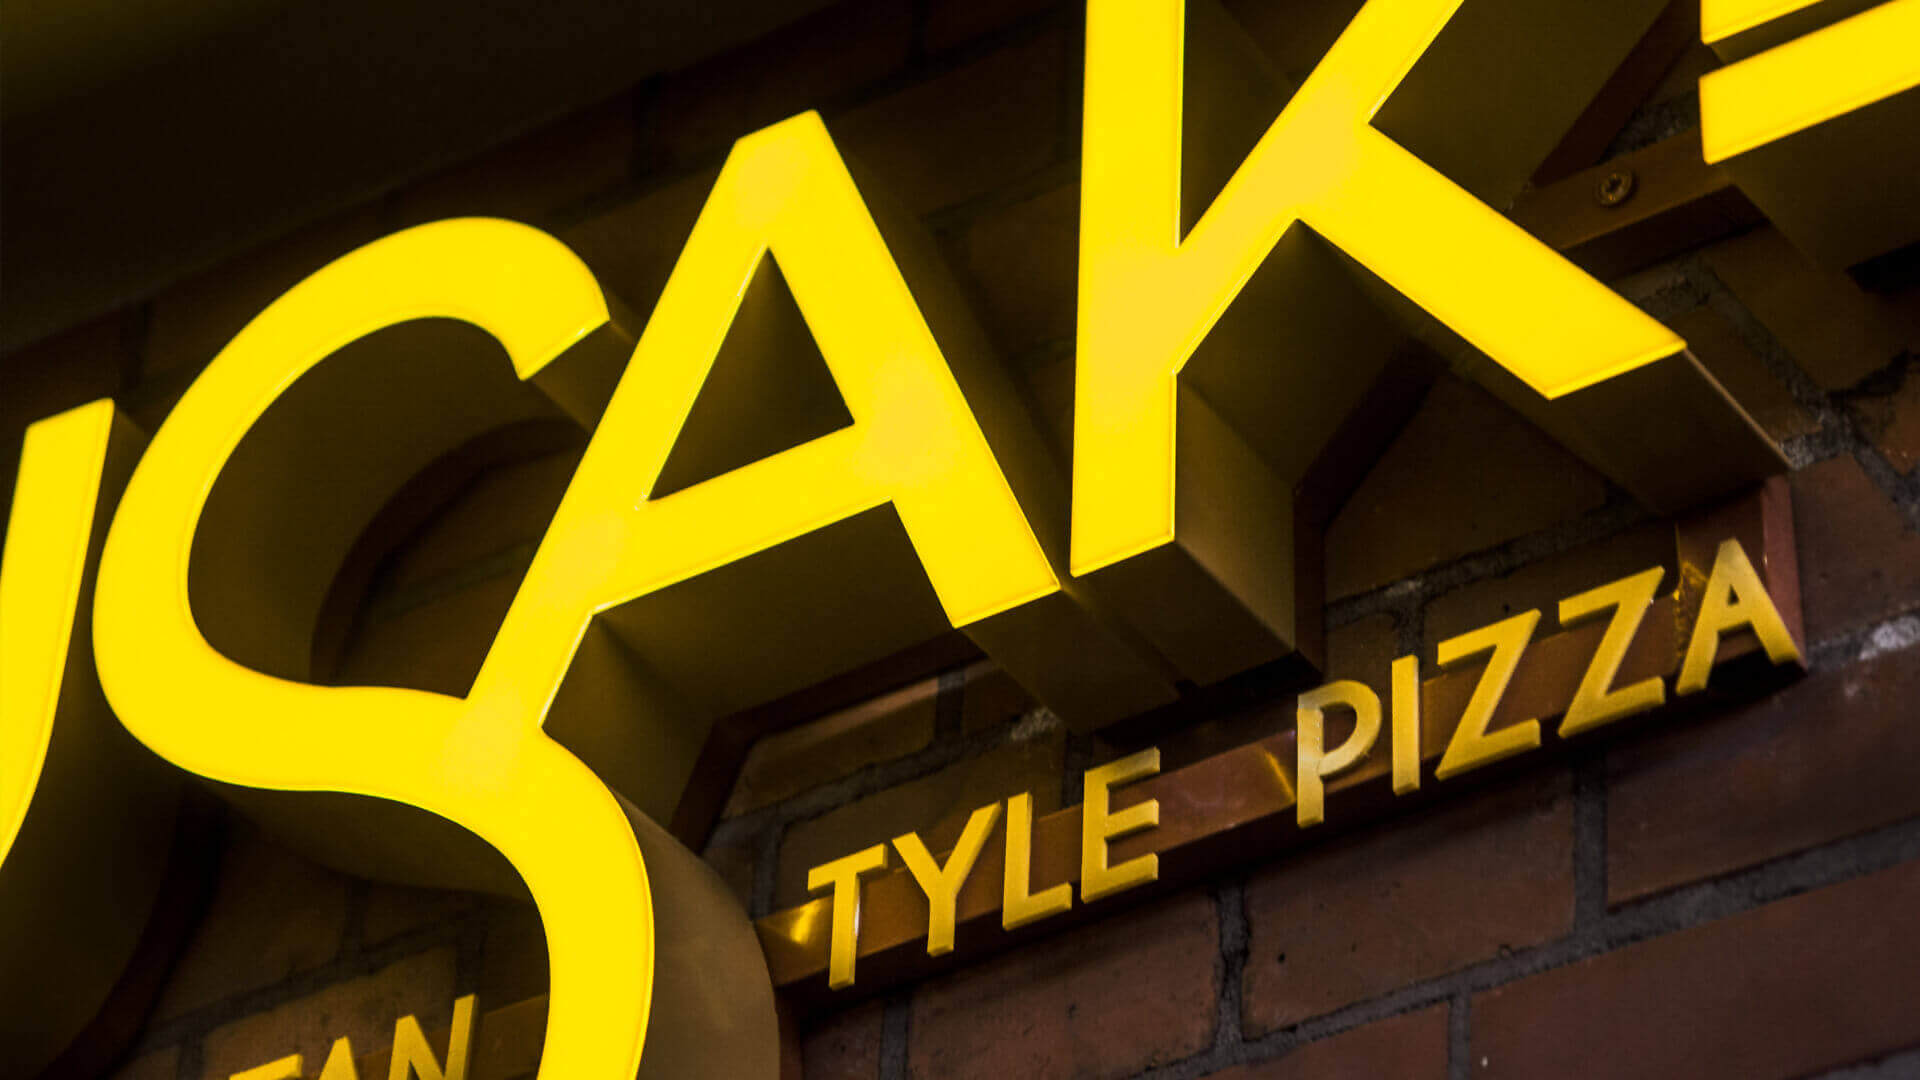 husak pizzeria - husak-pizzeria-zlote-letters-spatial-illuminated-tile-letters-on-the-wall-with-cegel-over-the-entry-over-the-surface-sign-mounted-to-the-wall-grunwaldzka-gdansk (14)